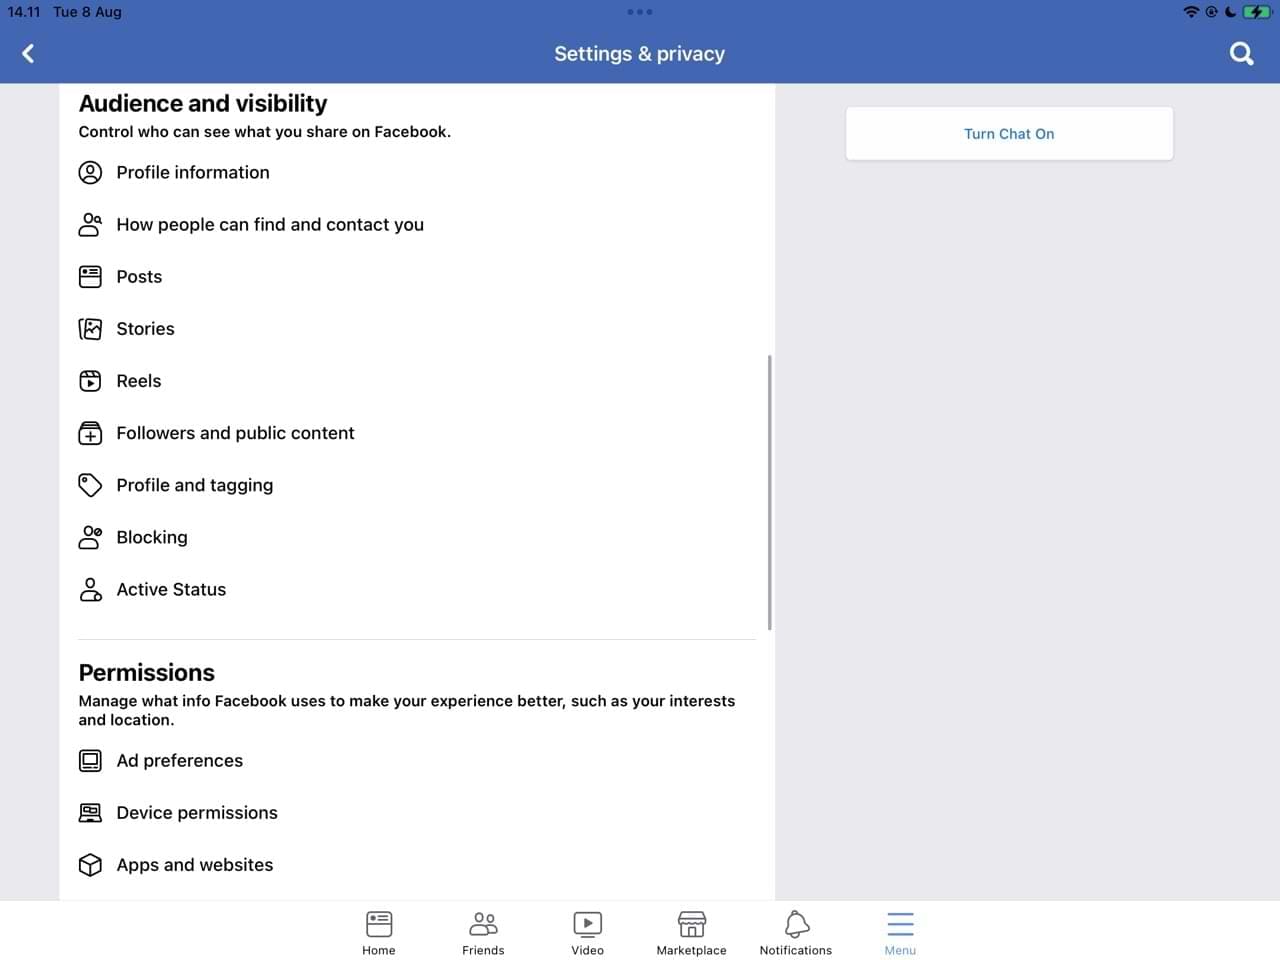 Facebook Audience and Visibility Settings